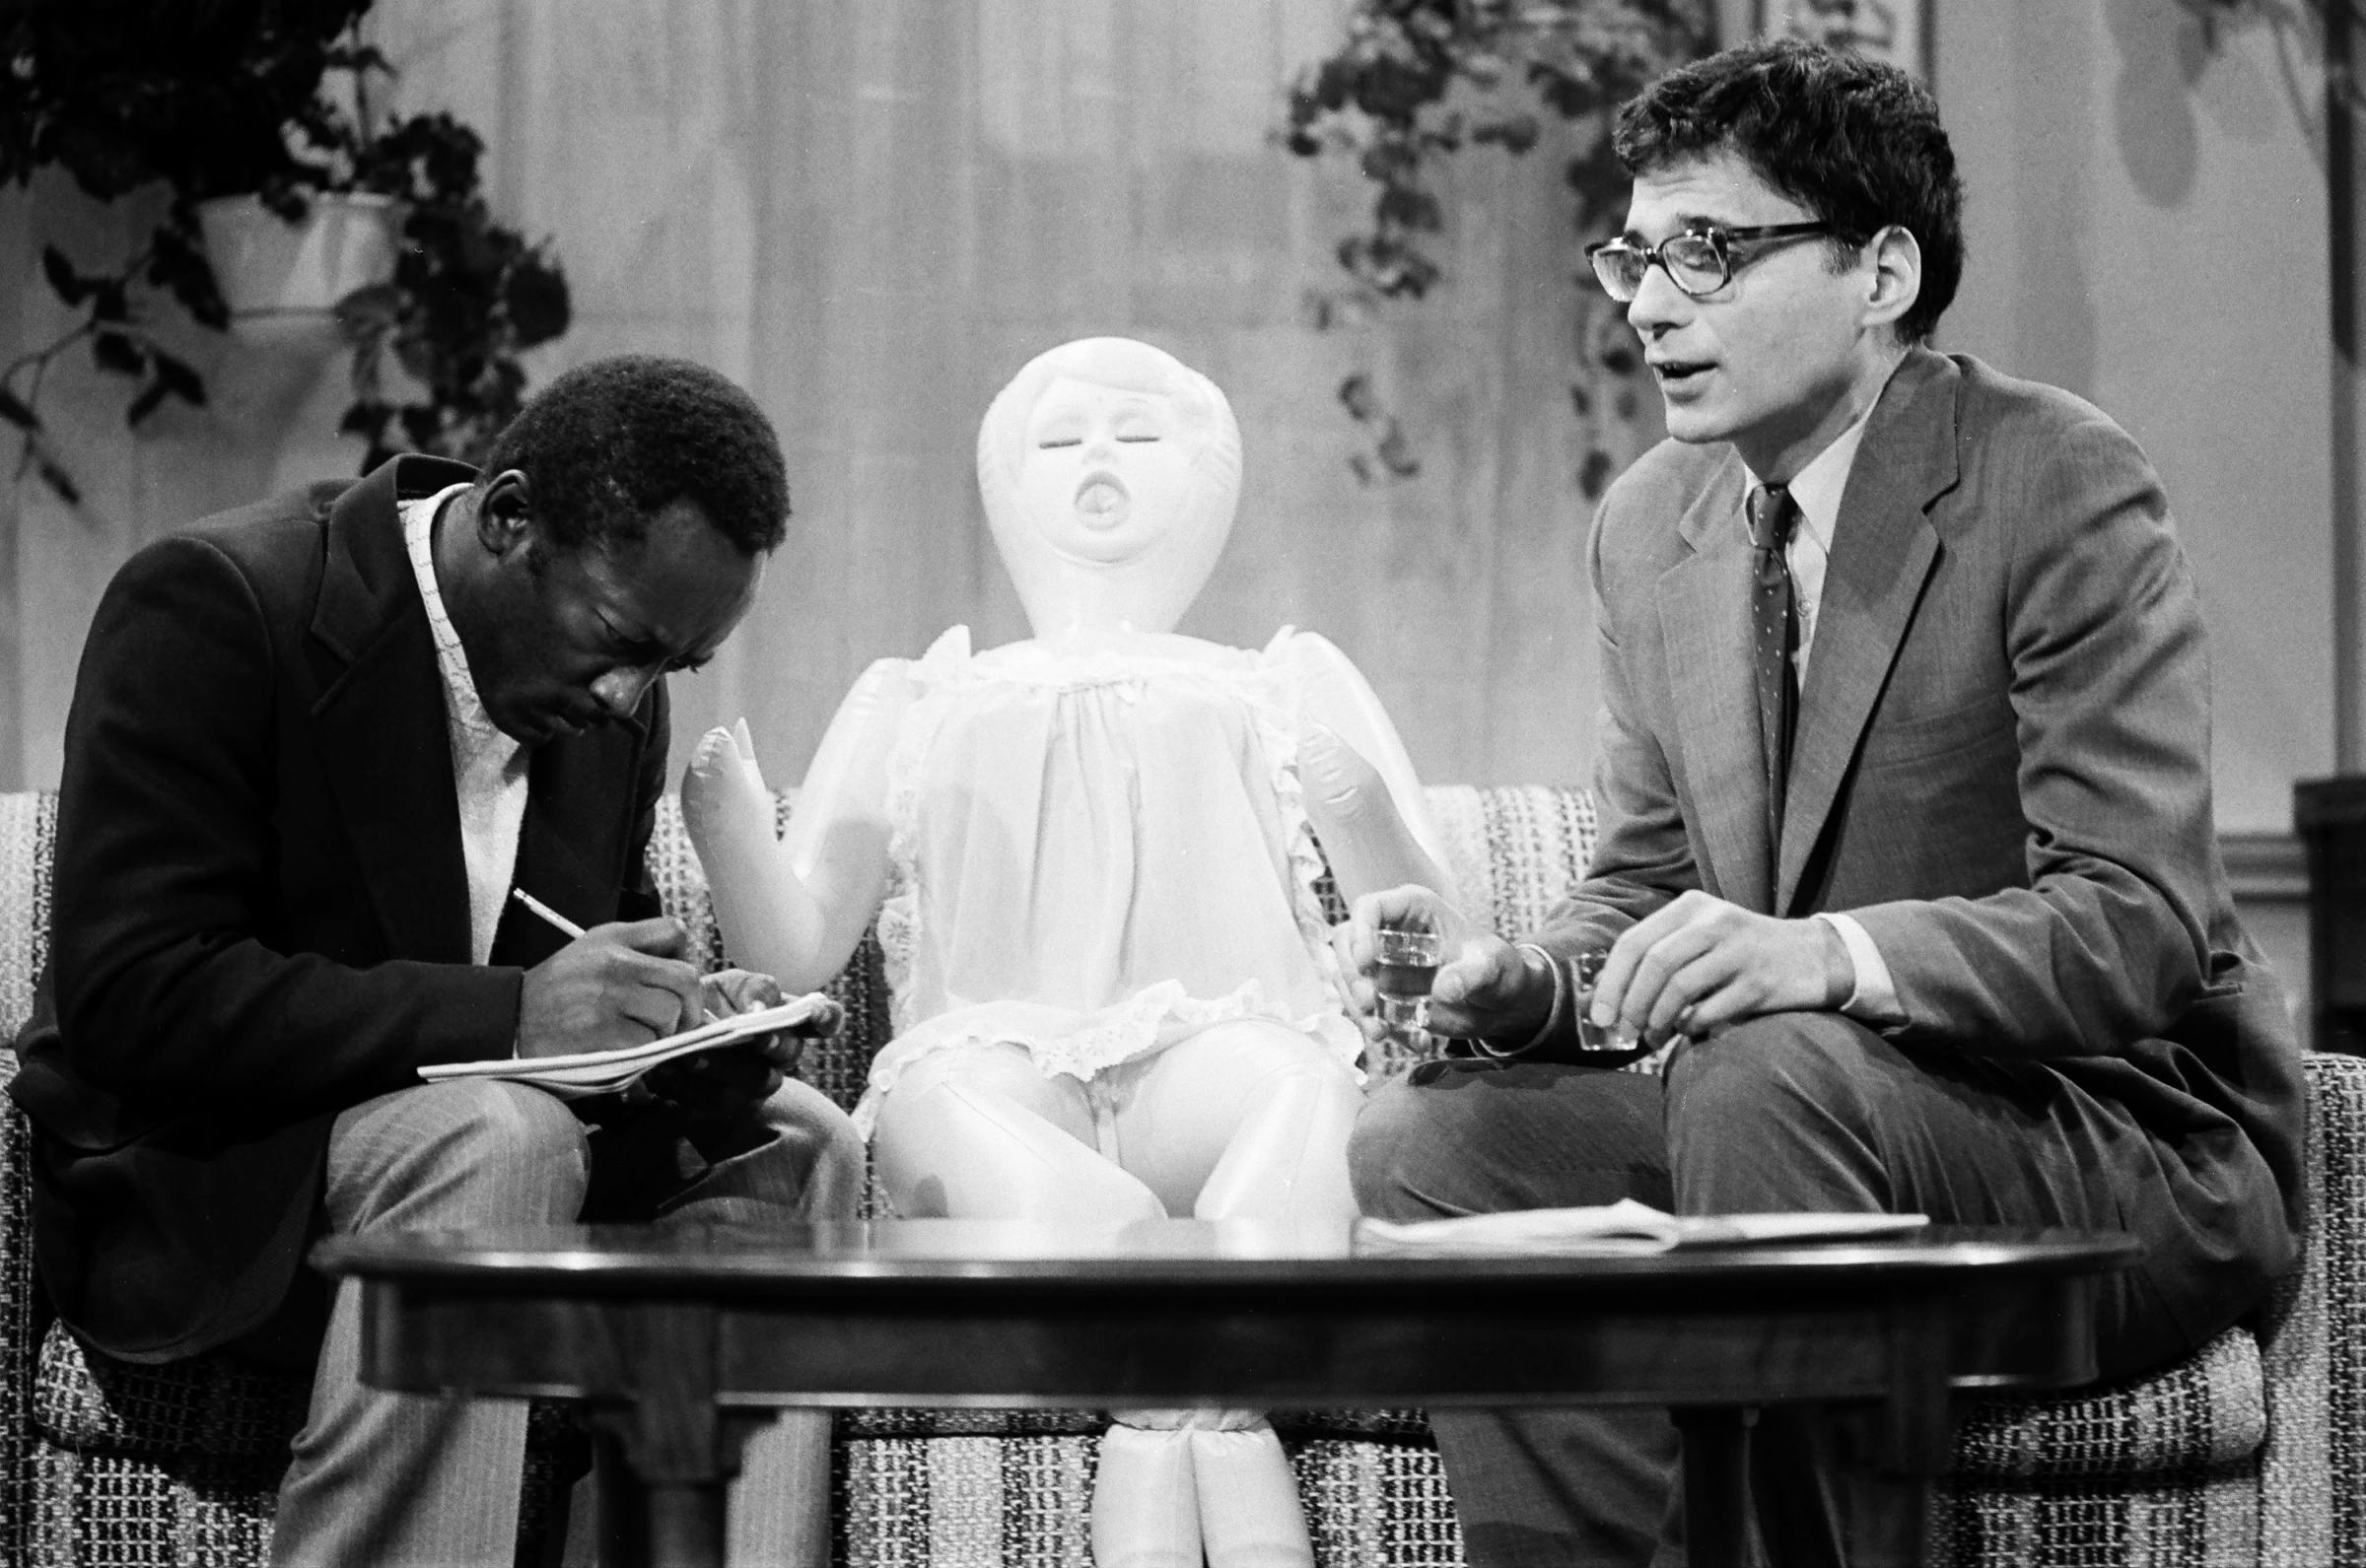 SATURDAY NIGHT LIVE -- Episode 11 -- Pictured: (l-r) Garrett Morris as Burt Inglestall, Ralph Nader during the 'Party Dolls' skit on January 15, 1977 -- Photo by: NBCU Photo Bank